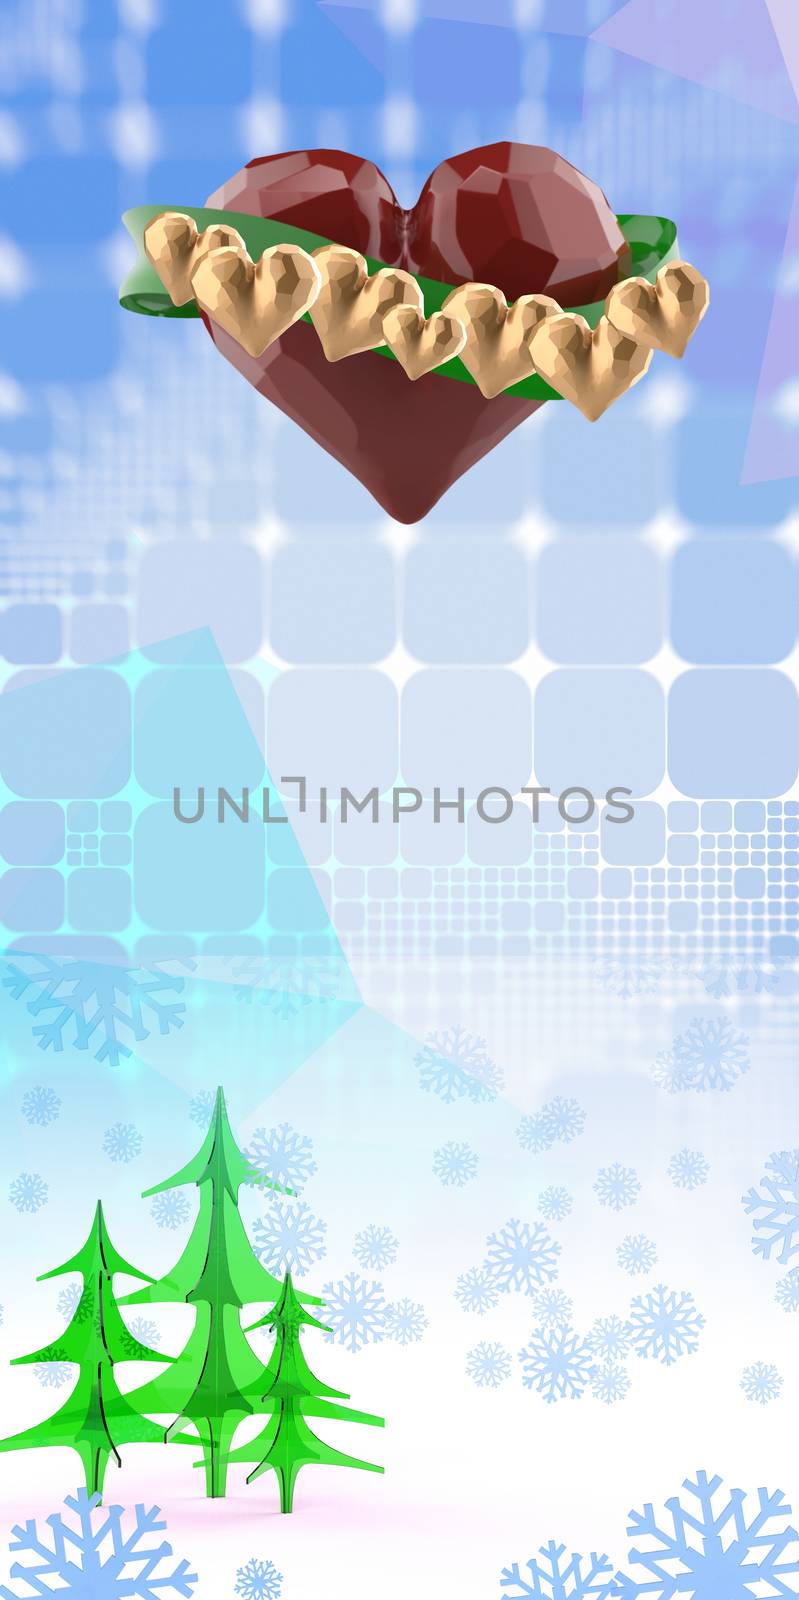 Happy Valentine day Flying red chopped heart with green ribbon and gold hearts. On blue abstract square polygonal background with christmas trees and snowflakes. 3d illustration.